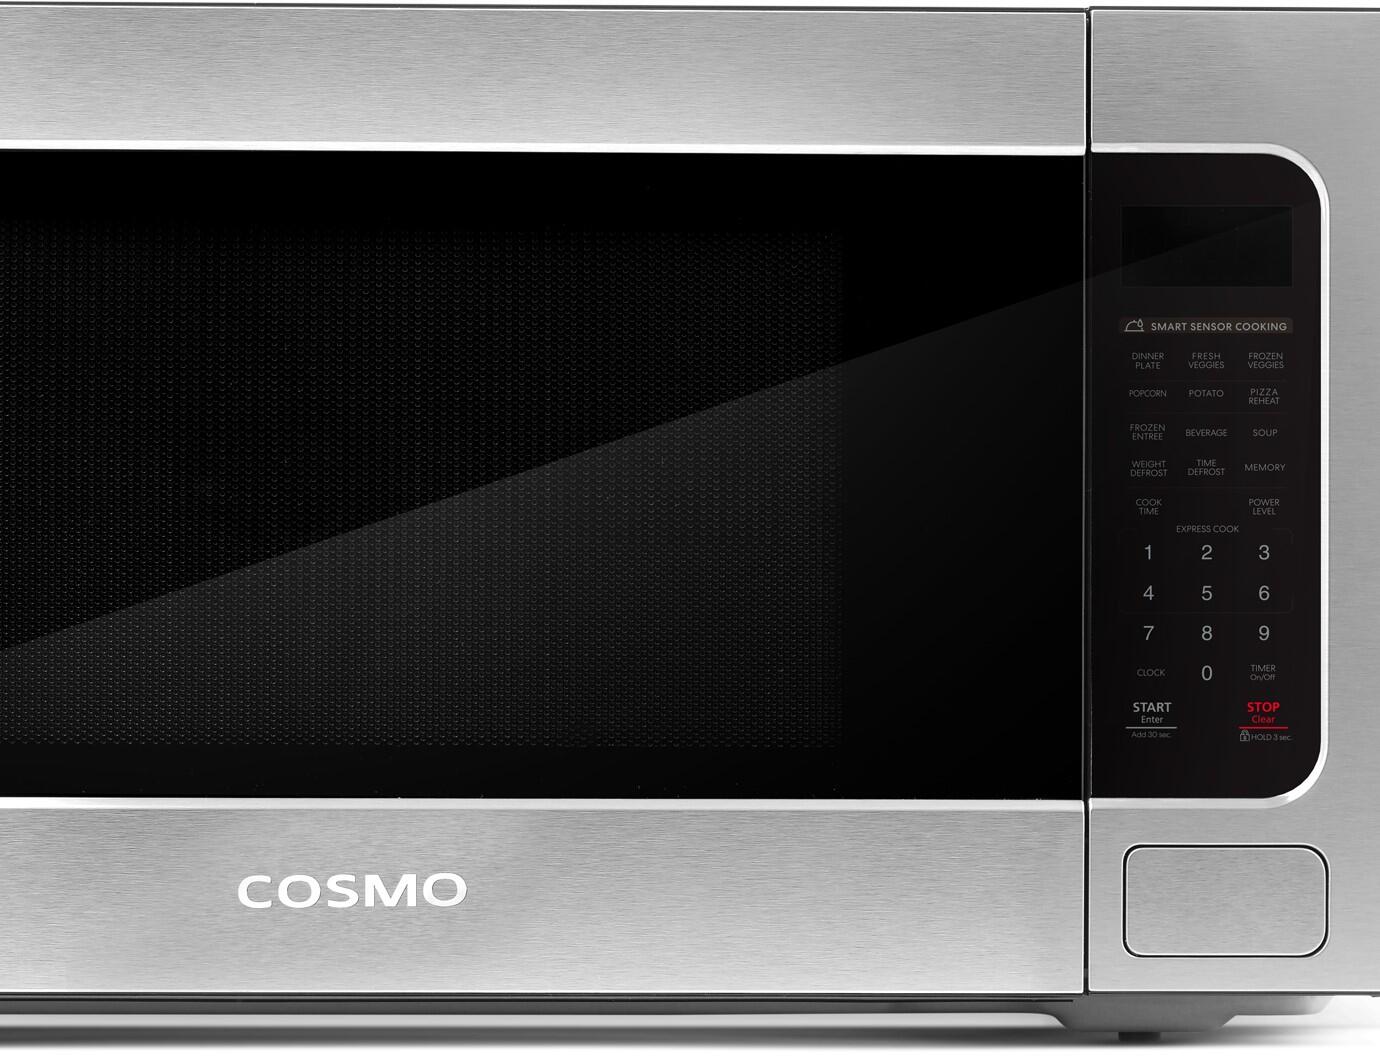 Cosmo - COS-BIM22SSB 24 in Countertop Microwave Oven with 2.2 cu. ft. Capacity | COS-BIM22SSB